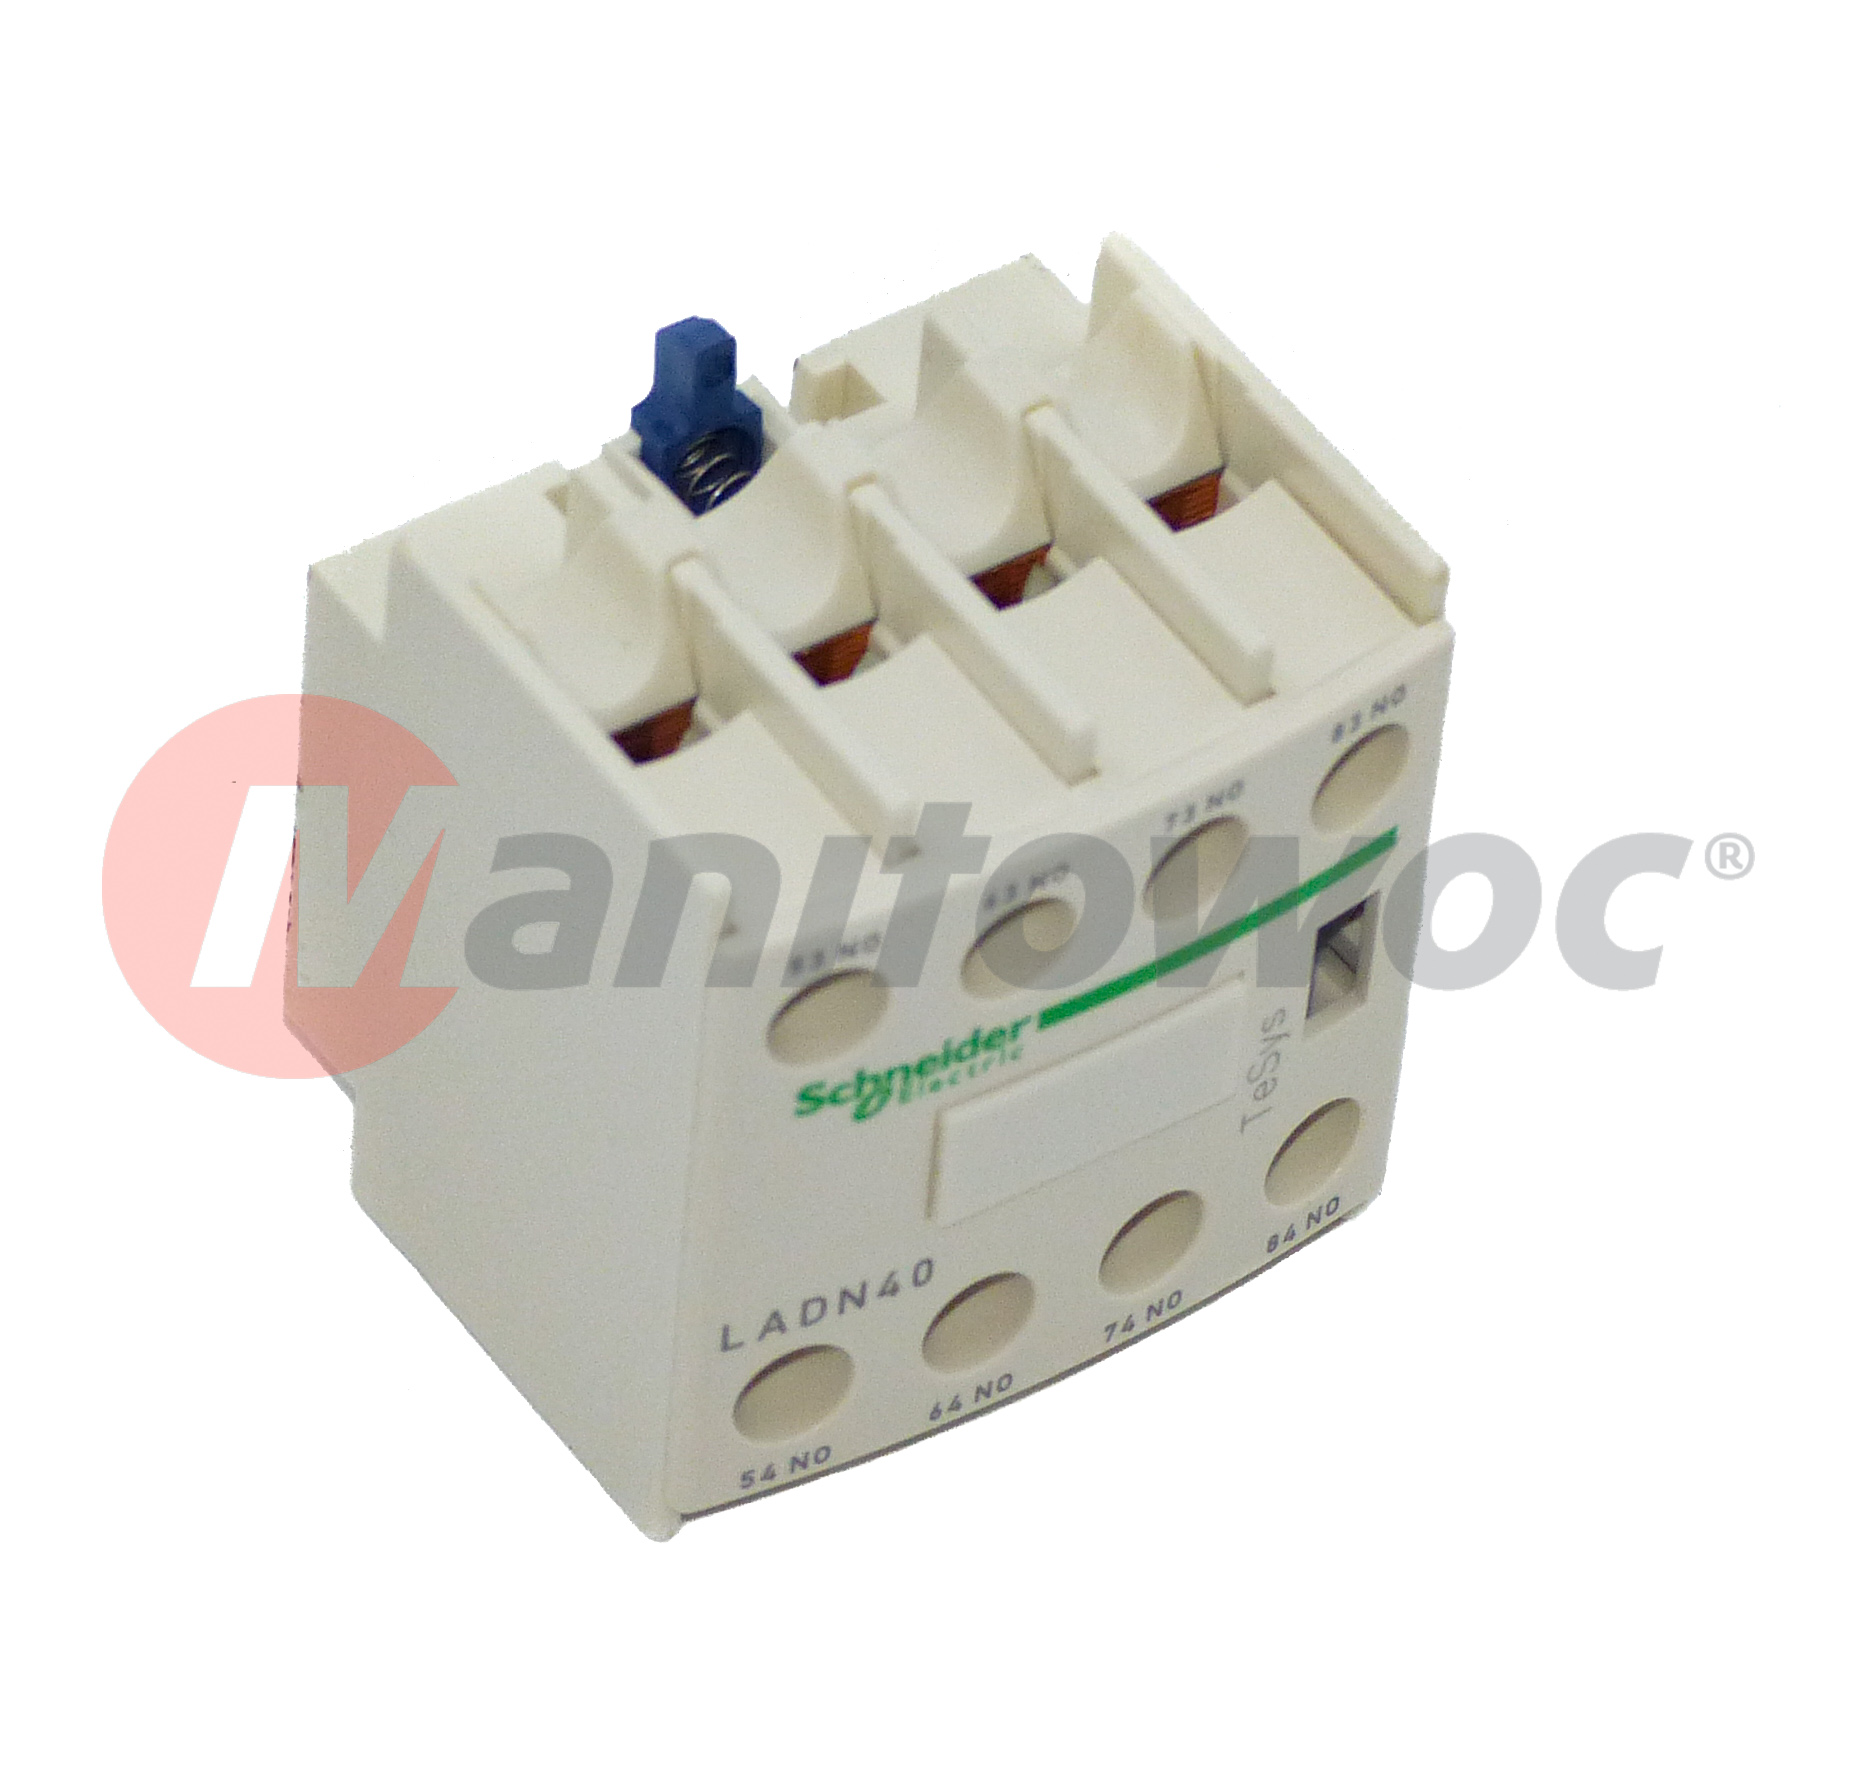 8 700 1040 - "AUXILIARY BLOCK 4F FRONT"